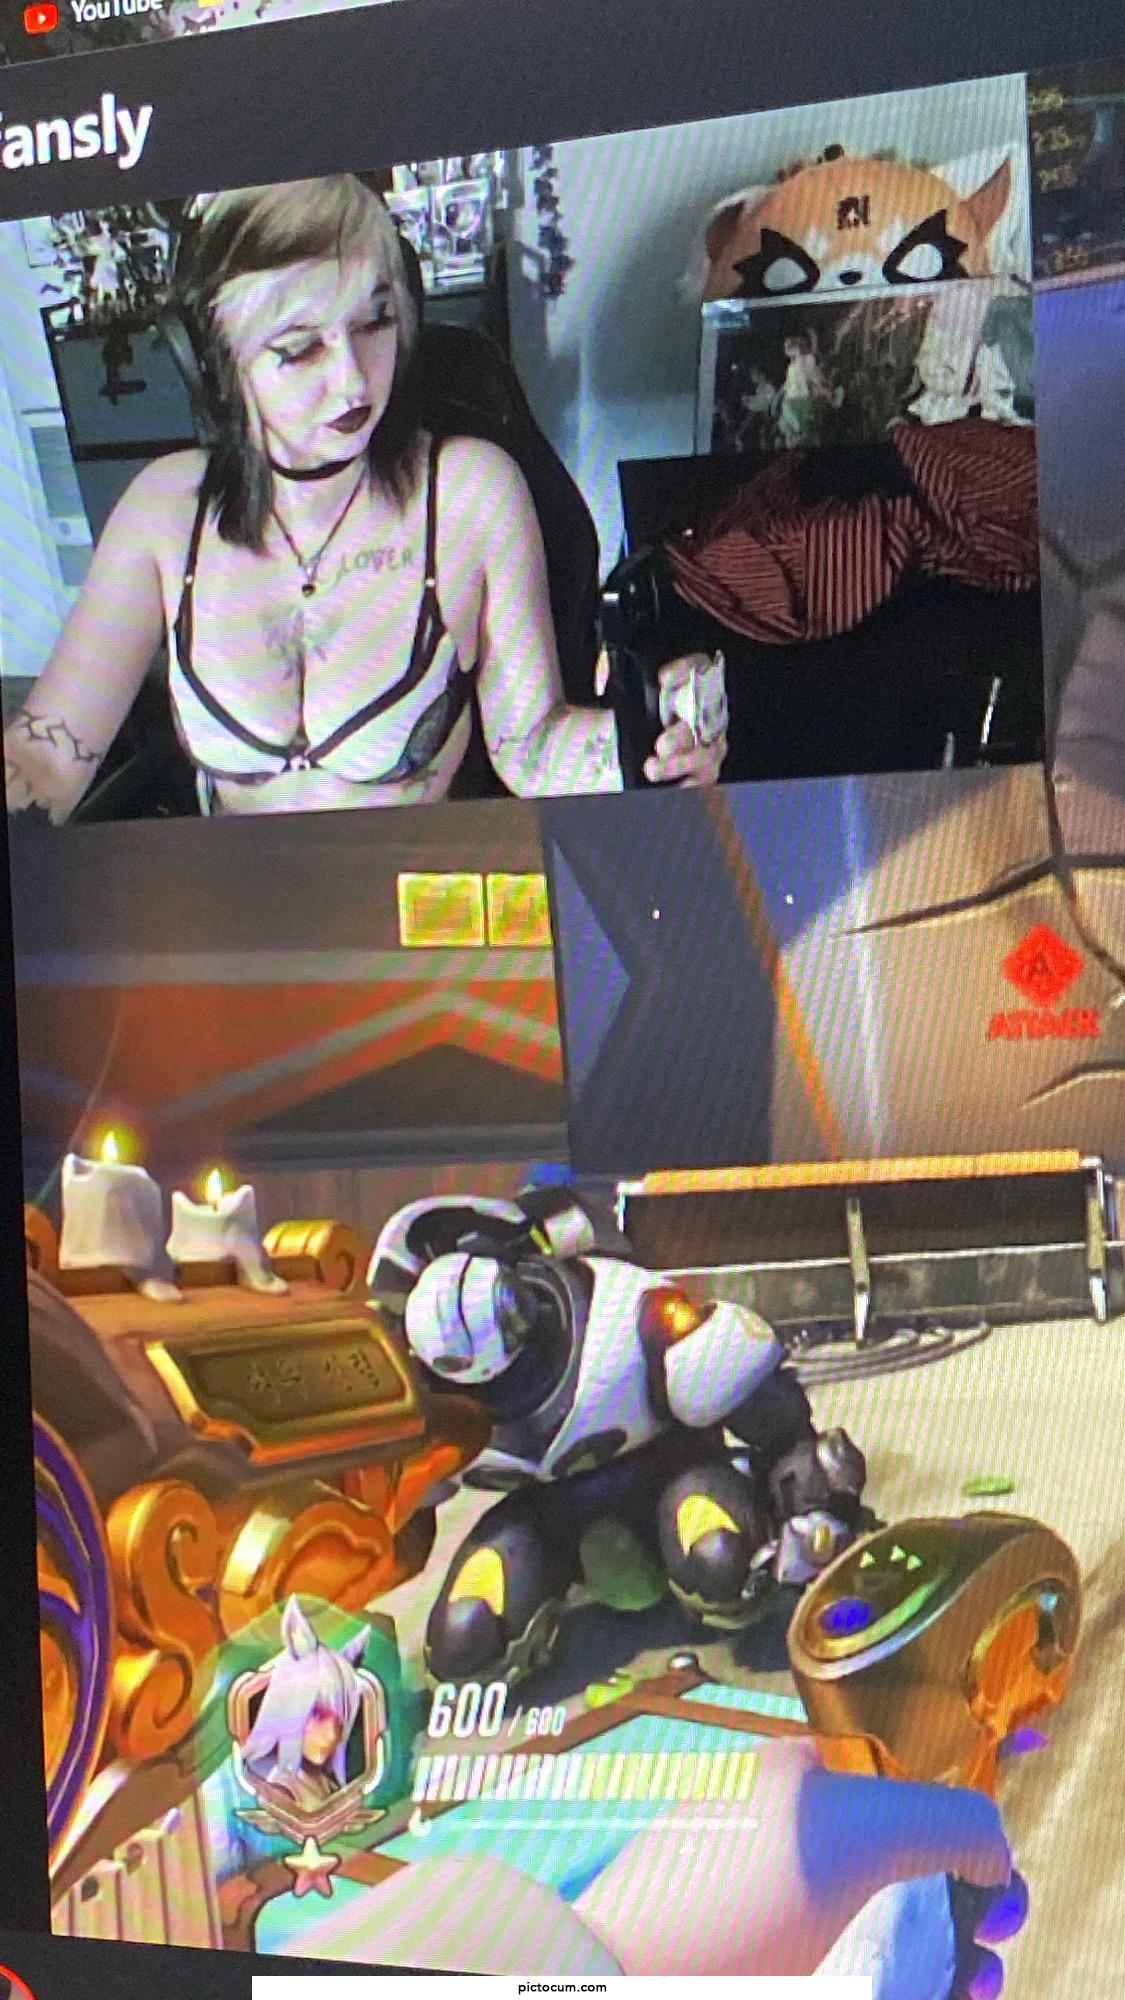 Yes overwatch is cringe but I strip on stream